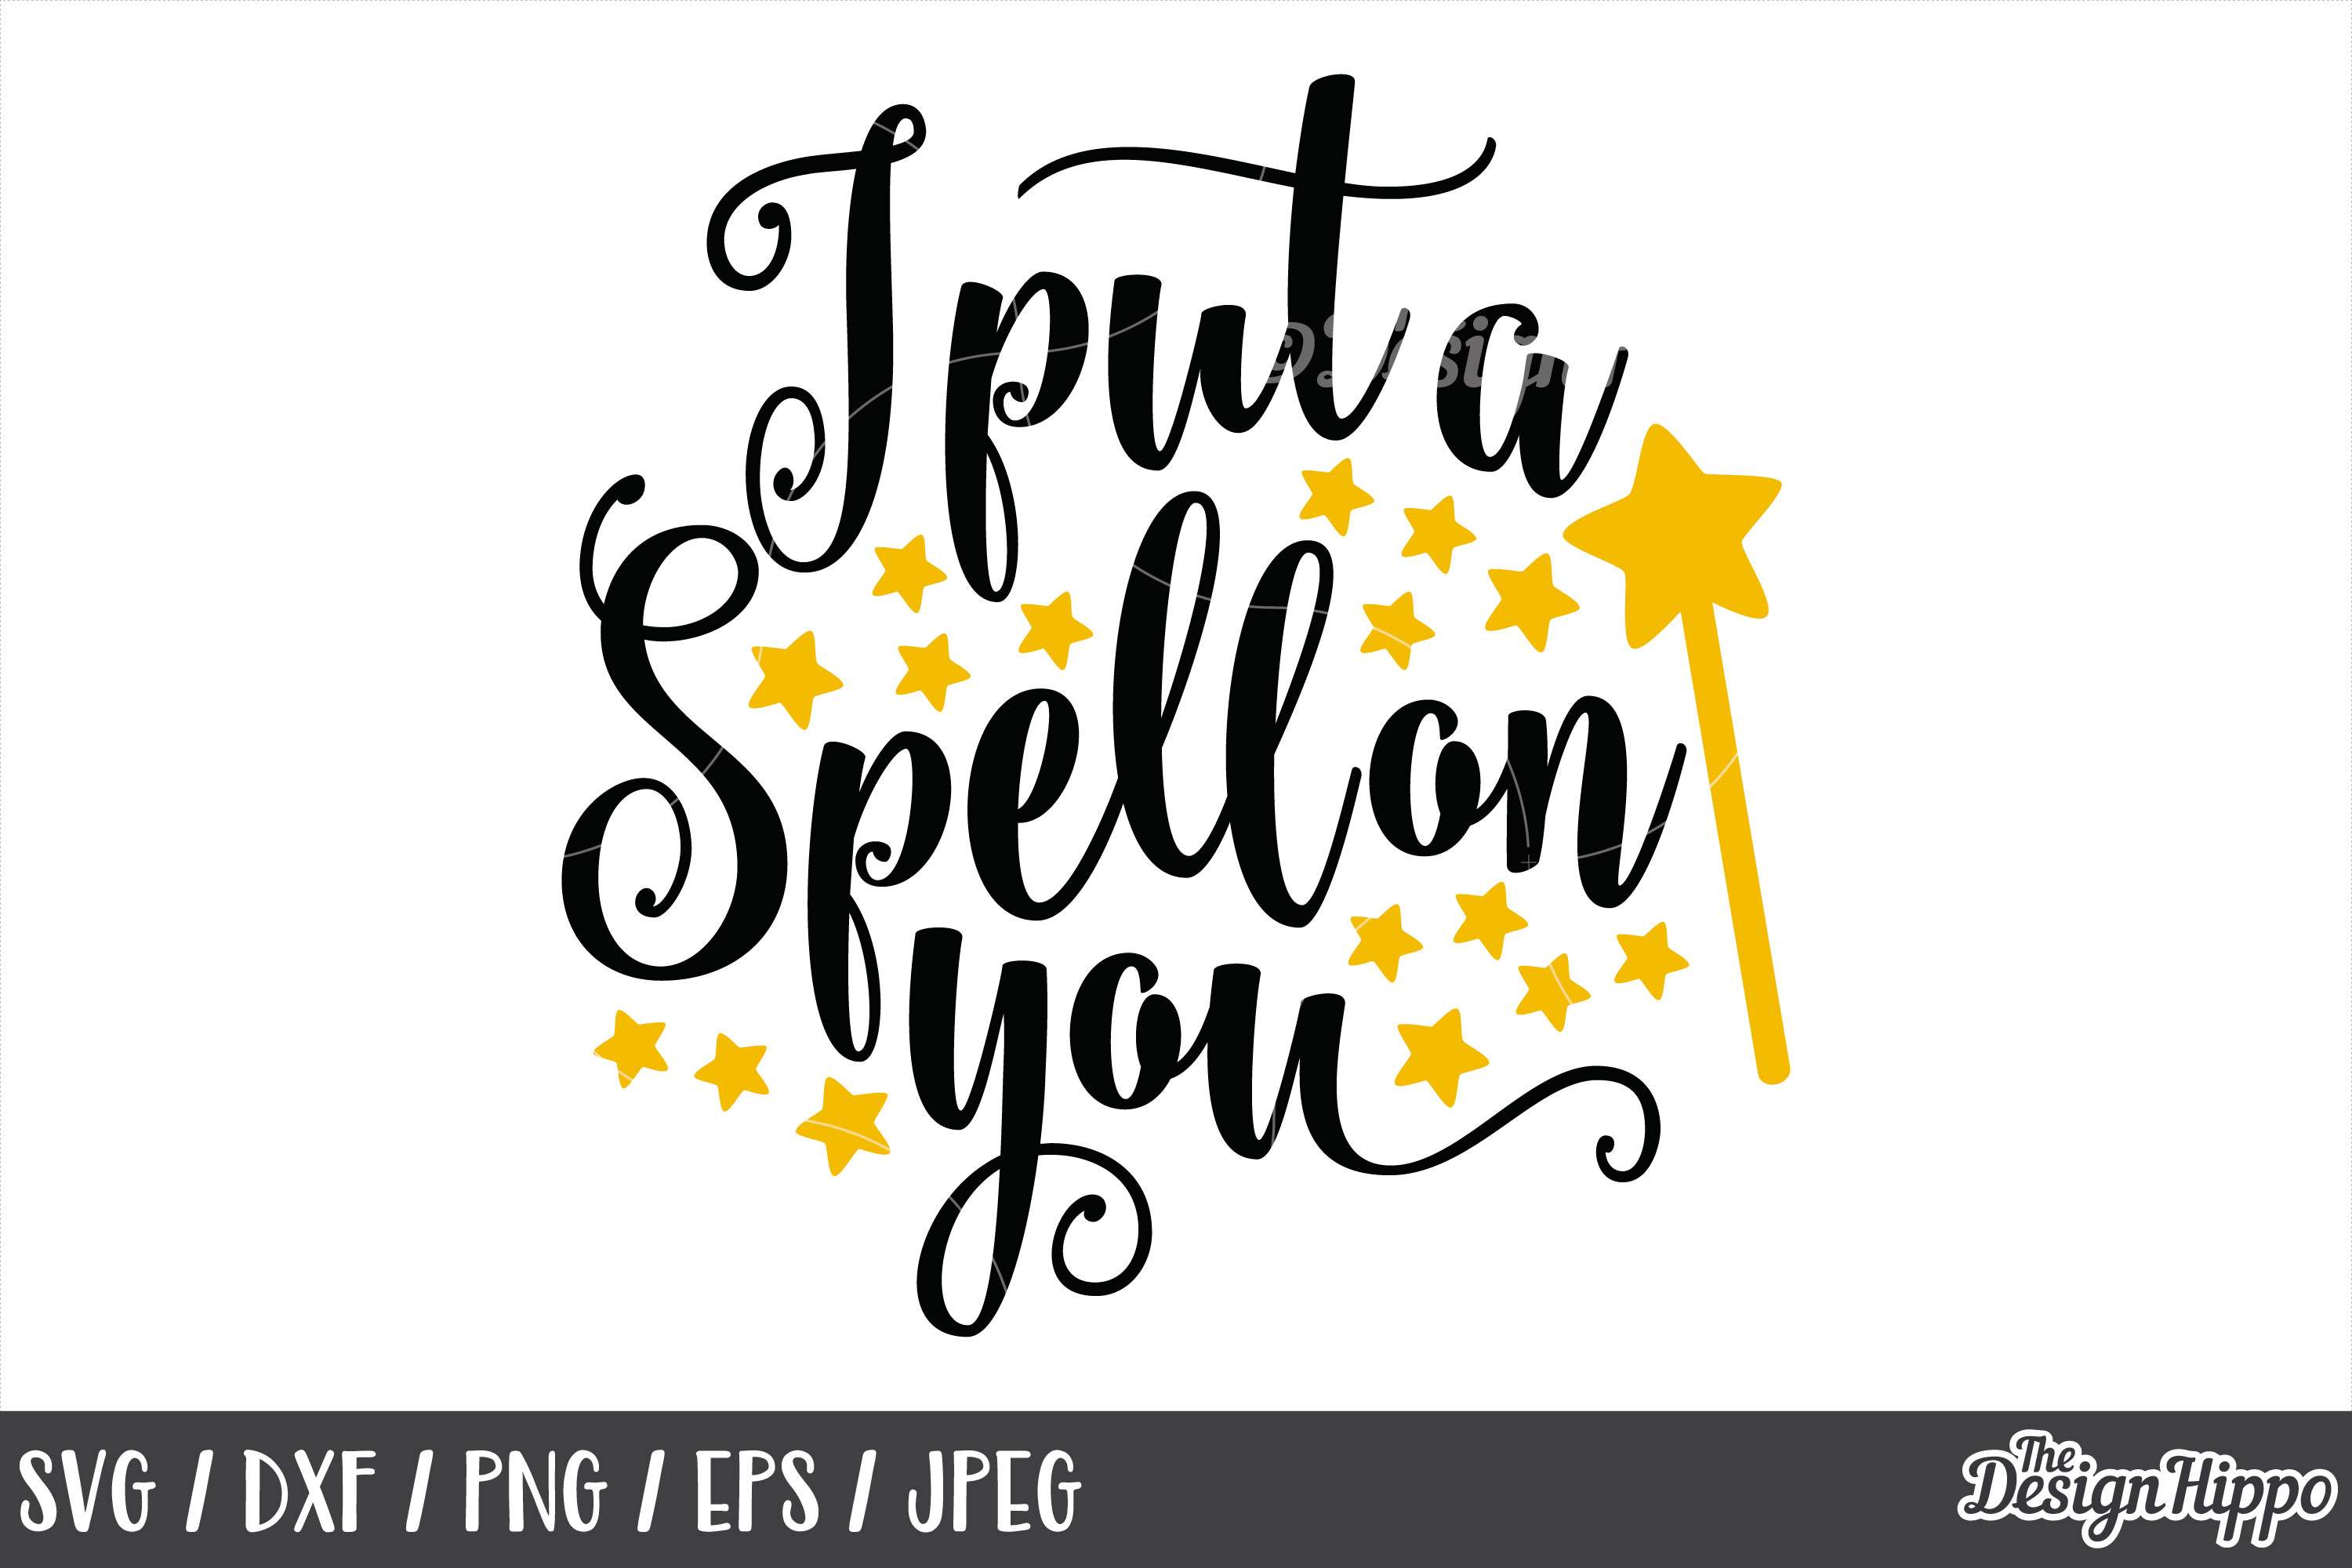 I Put a Spell On You SVG, DXF, PNG, JPEG, Cut Files, Cricut